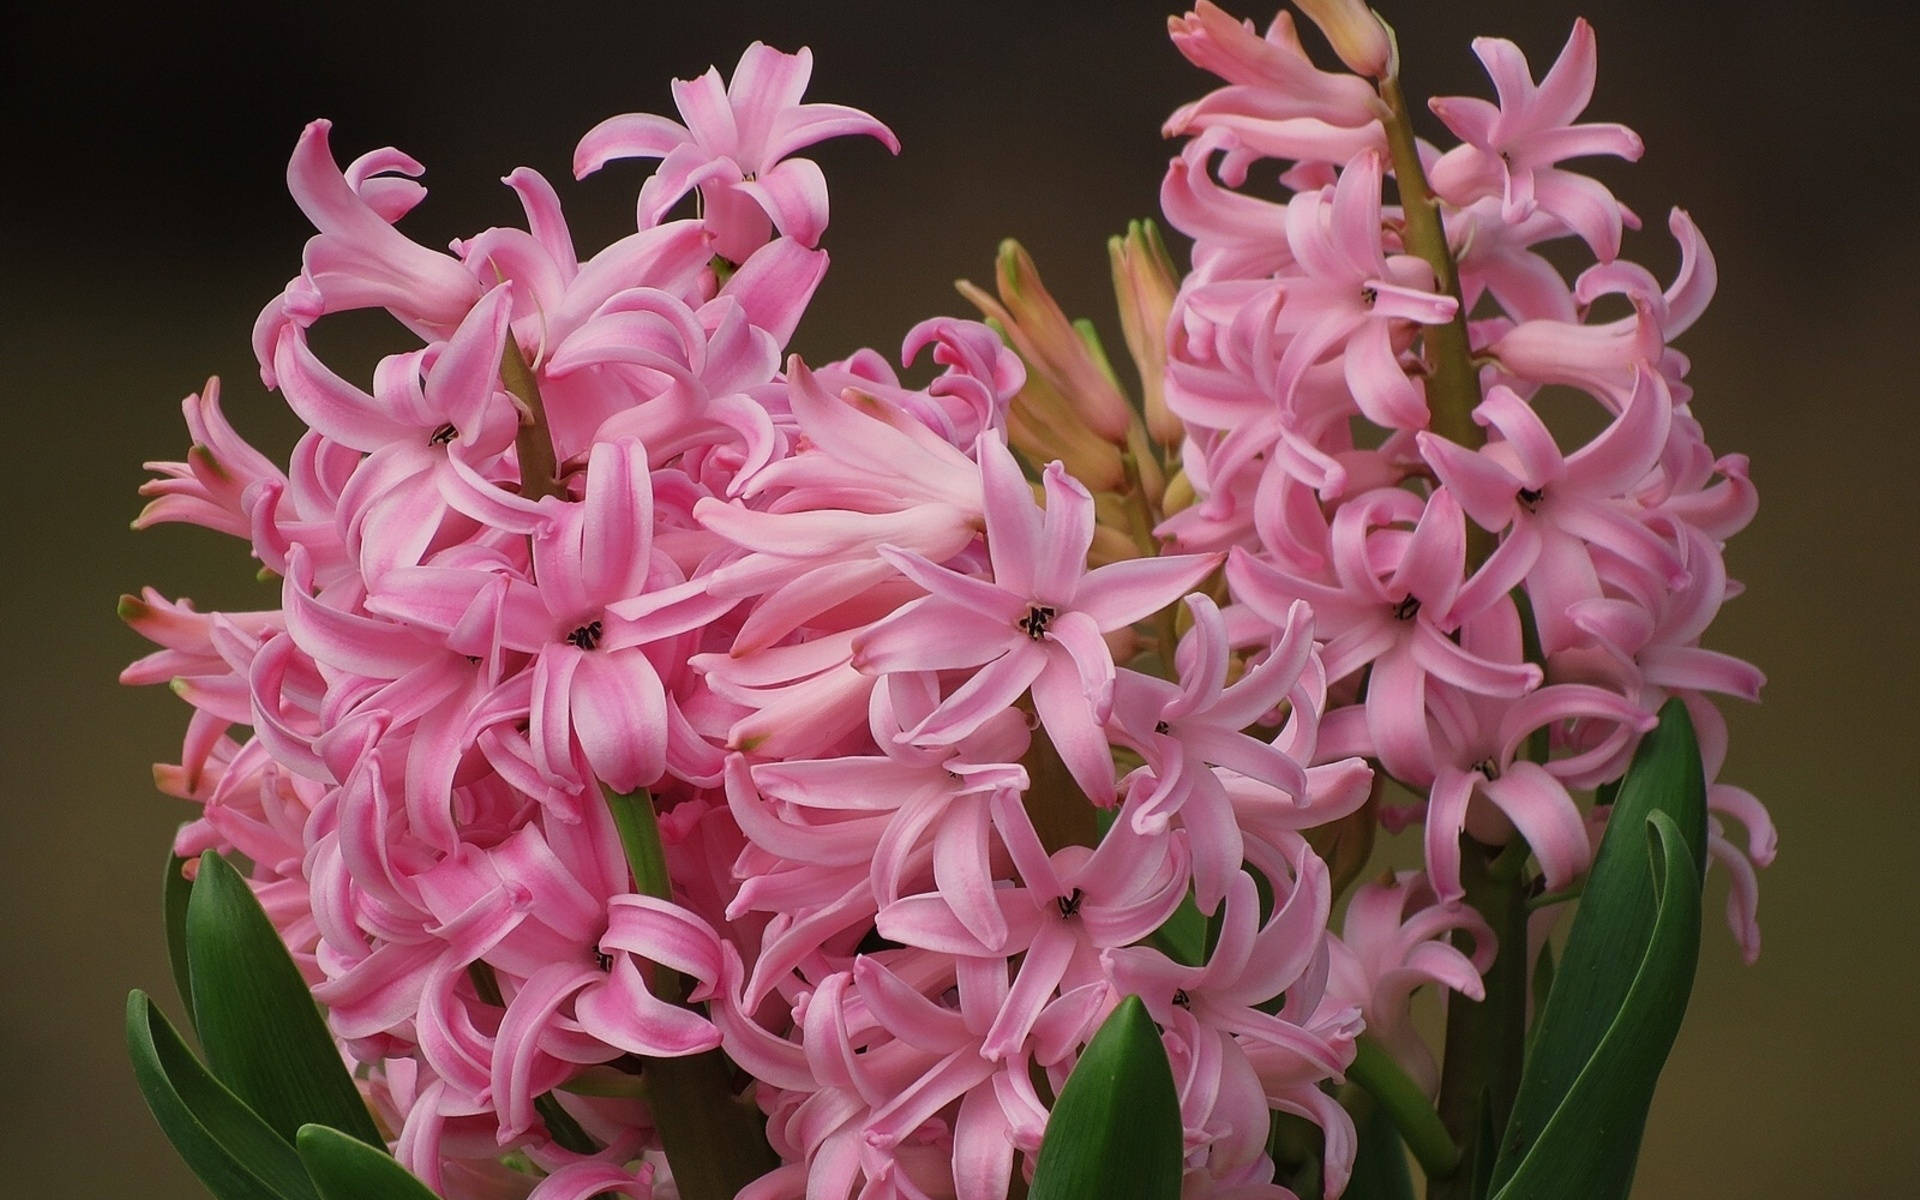 Pink Festival Hyacinth Flowers Background